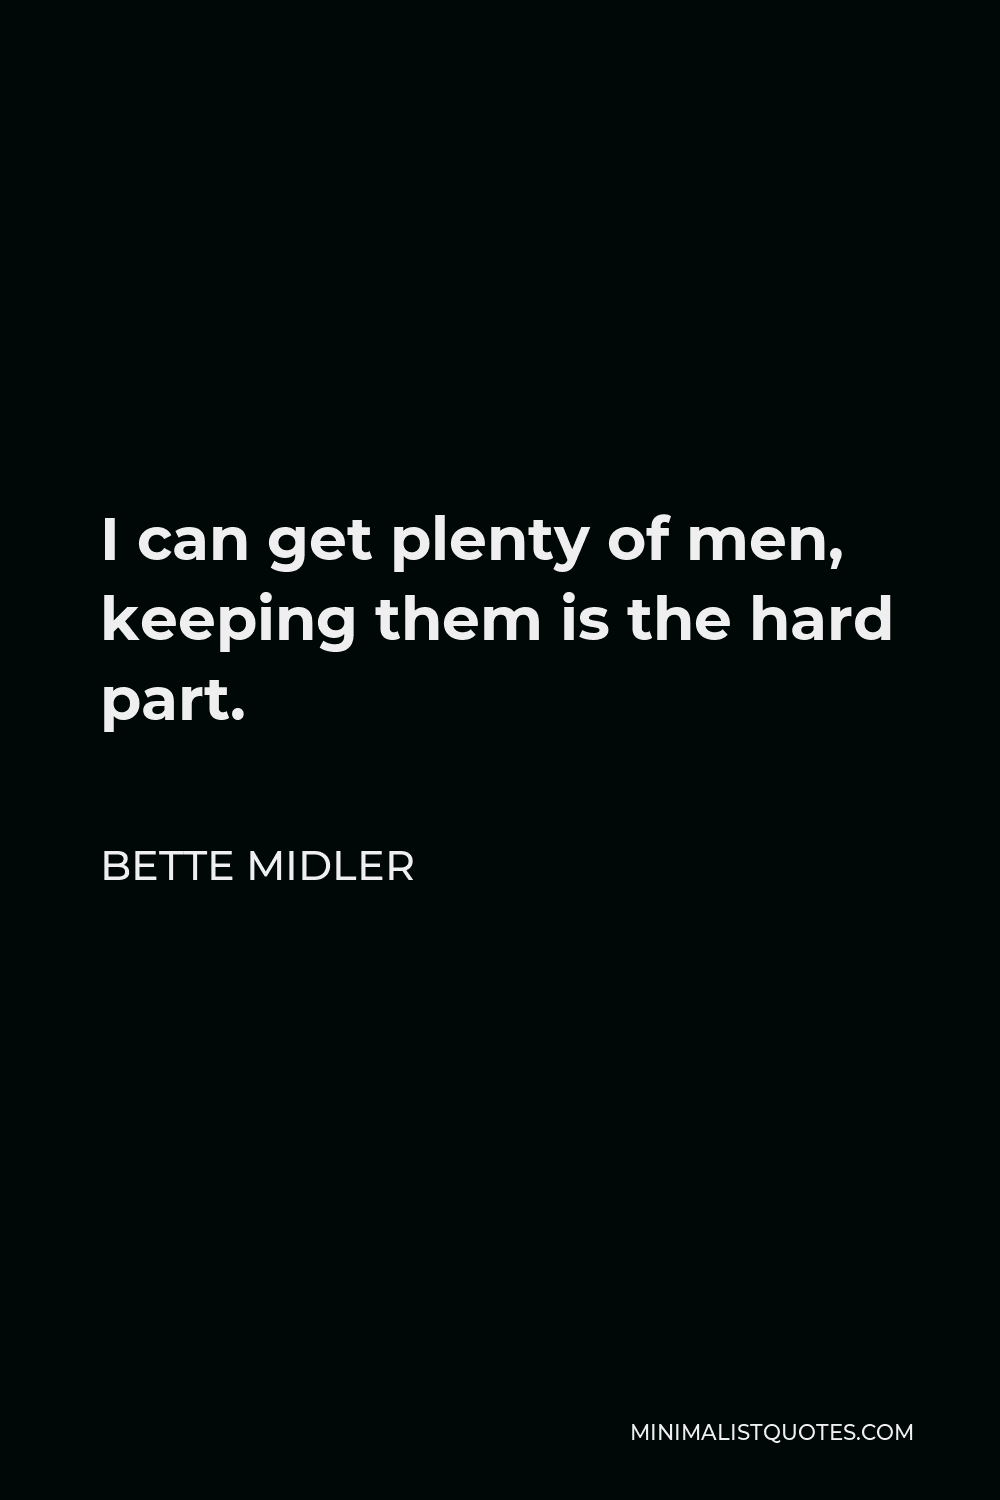 Bette Midler Quote - I can get plenty of men, keeping them is the hard part.